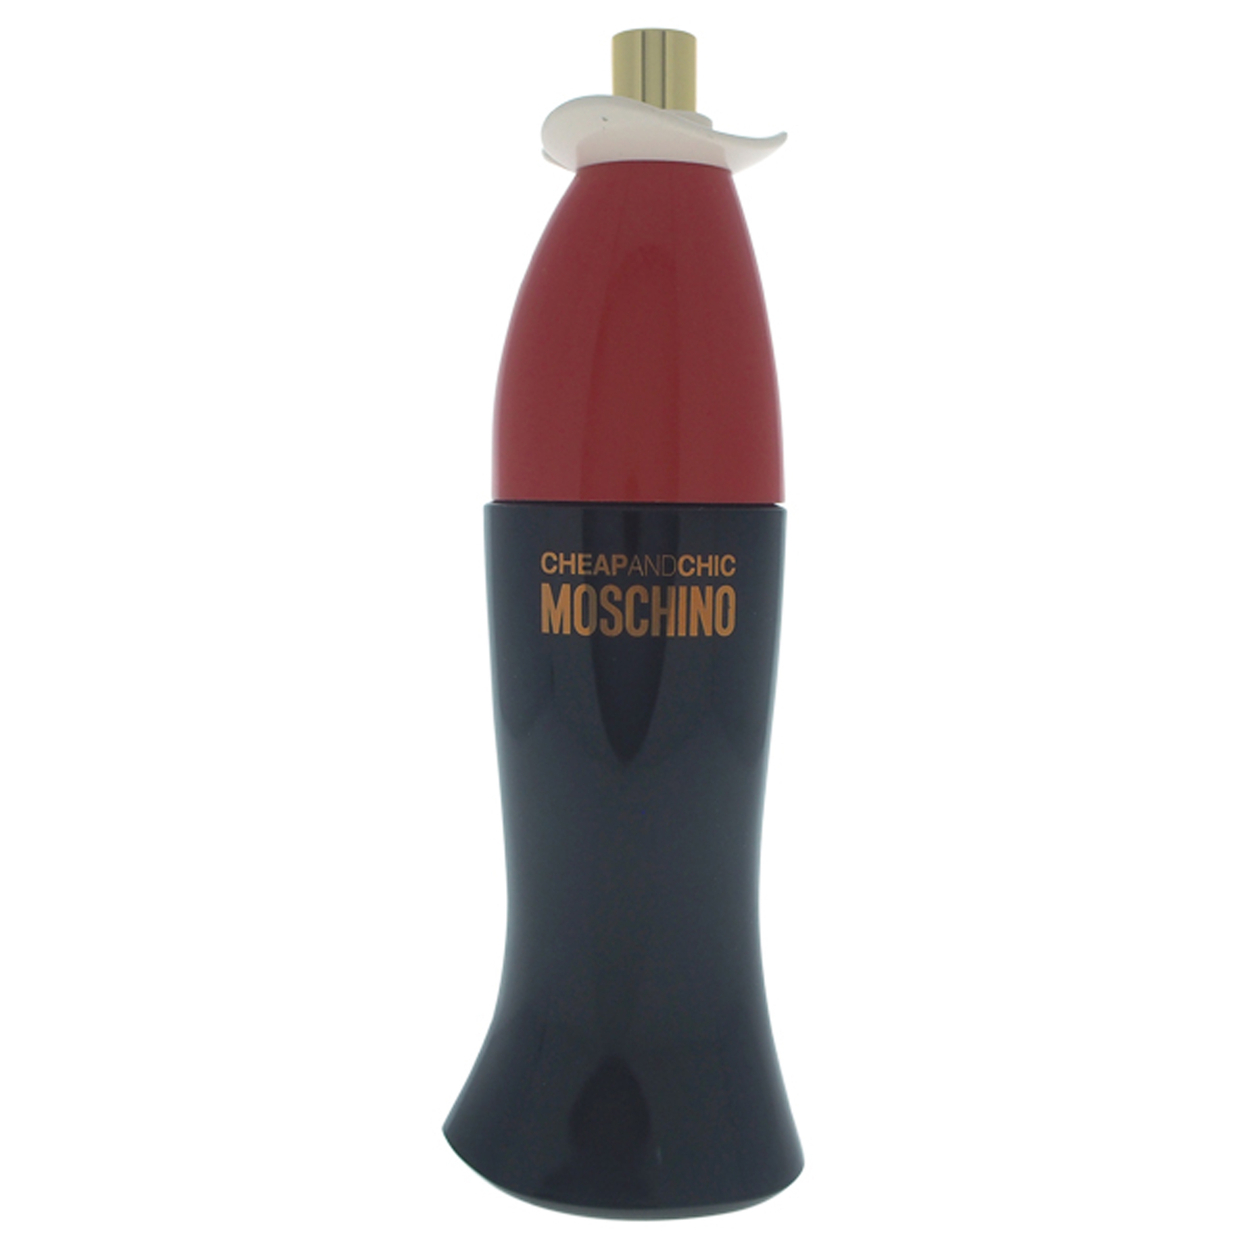 Moschino And Chic EDT Spray 3.4 Oz